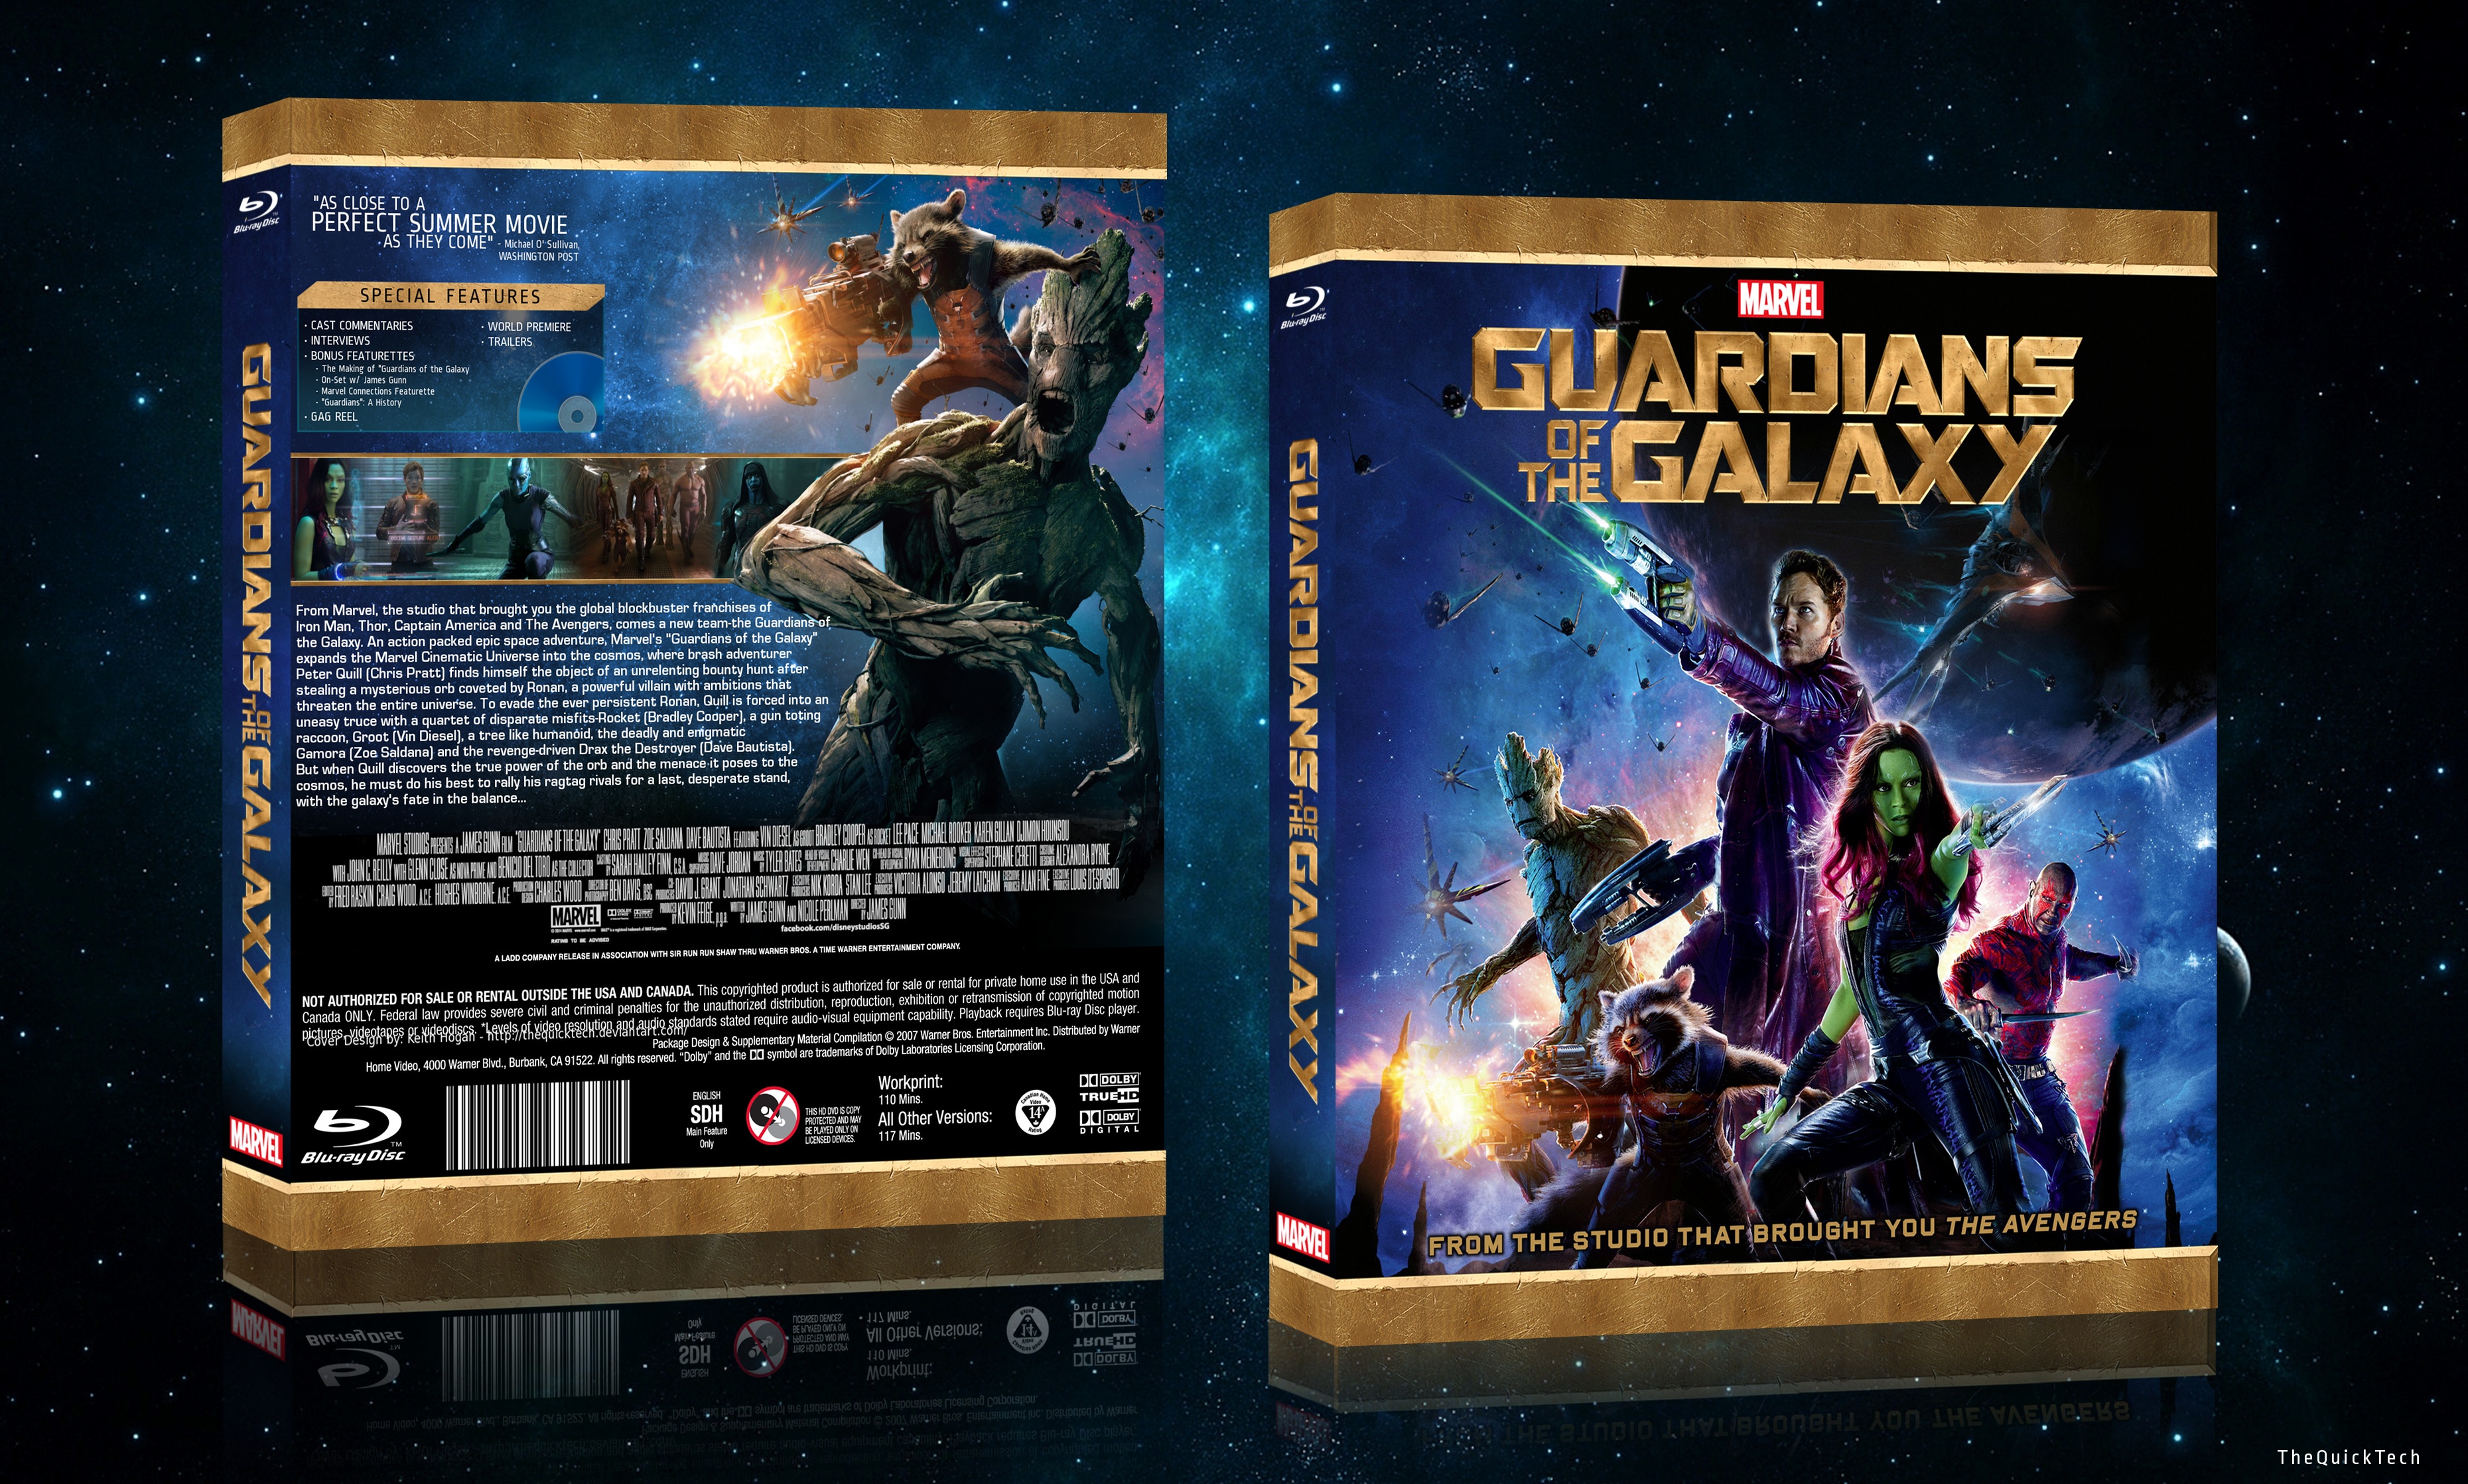 Guardians of The Galaxy box cover